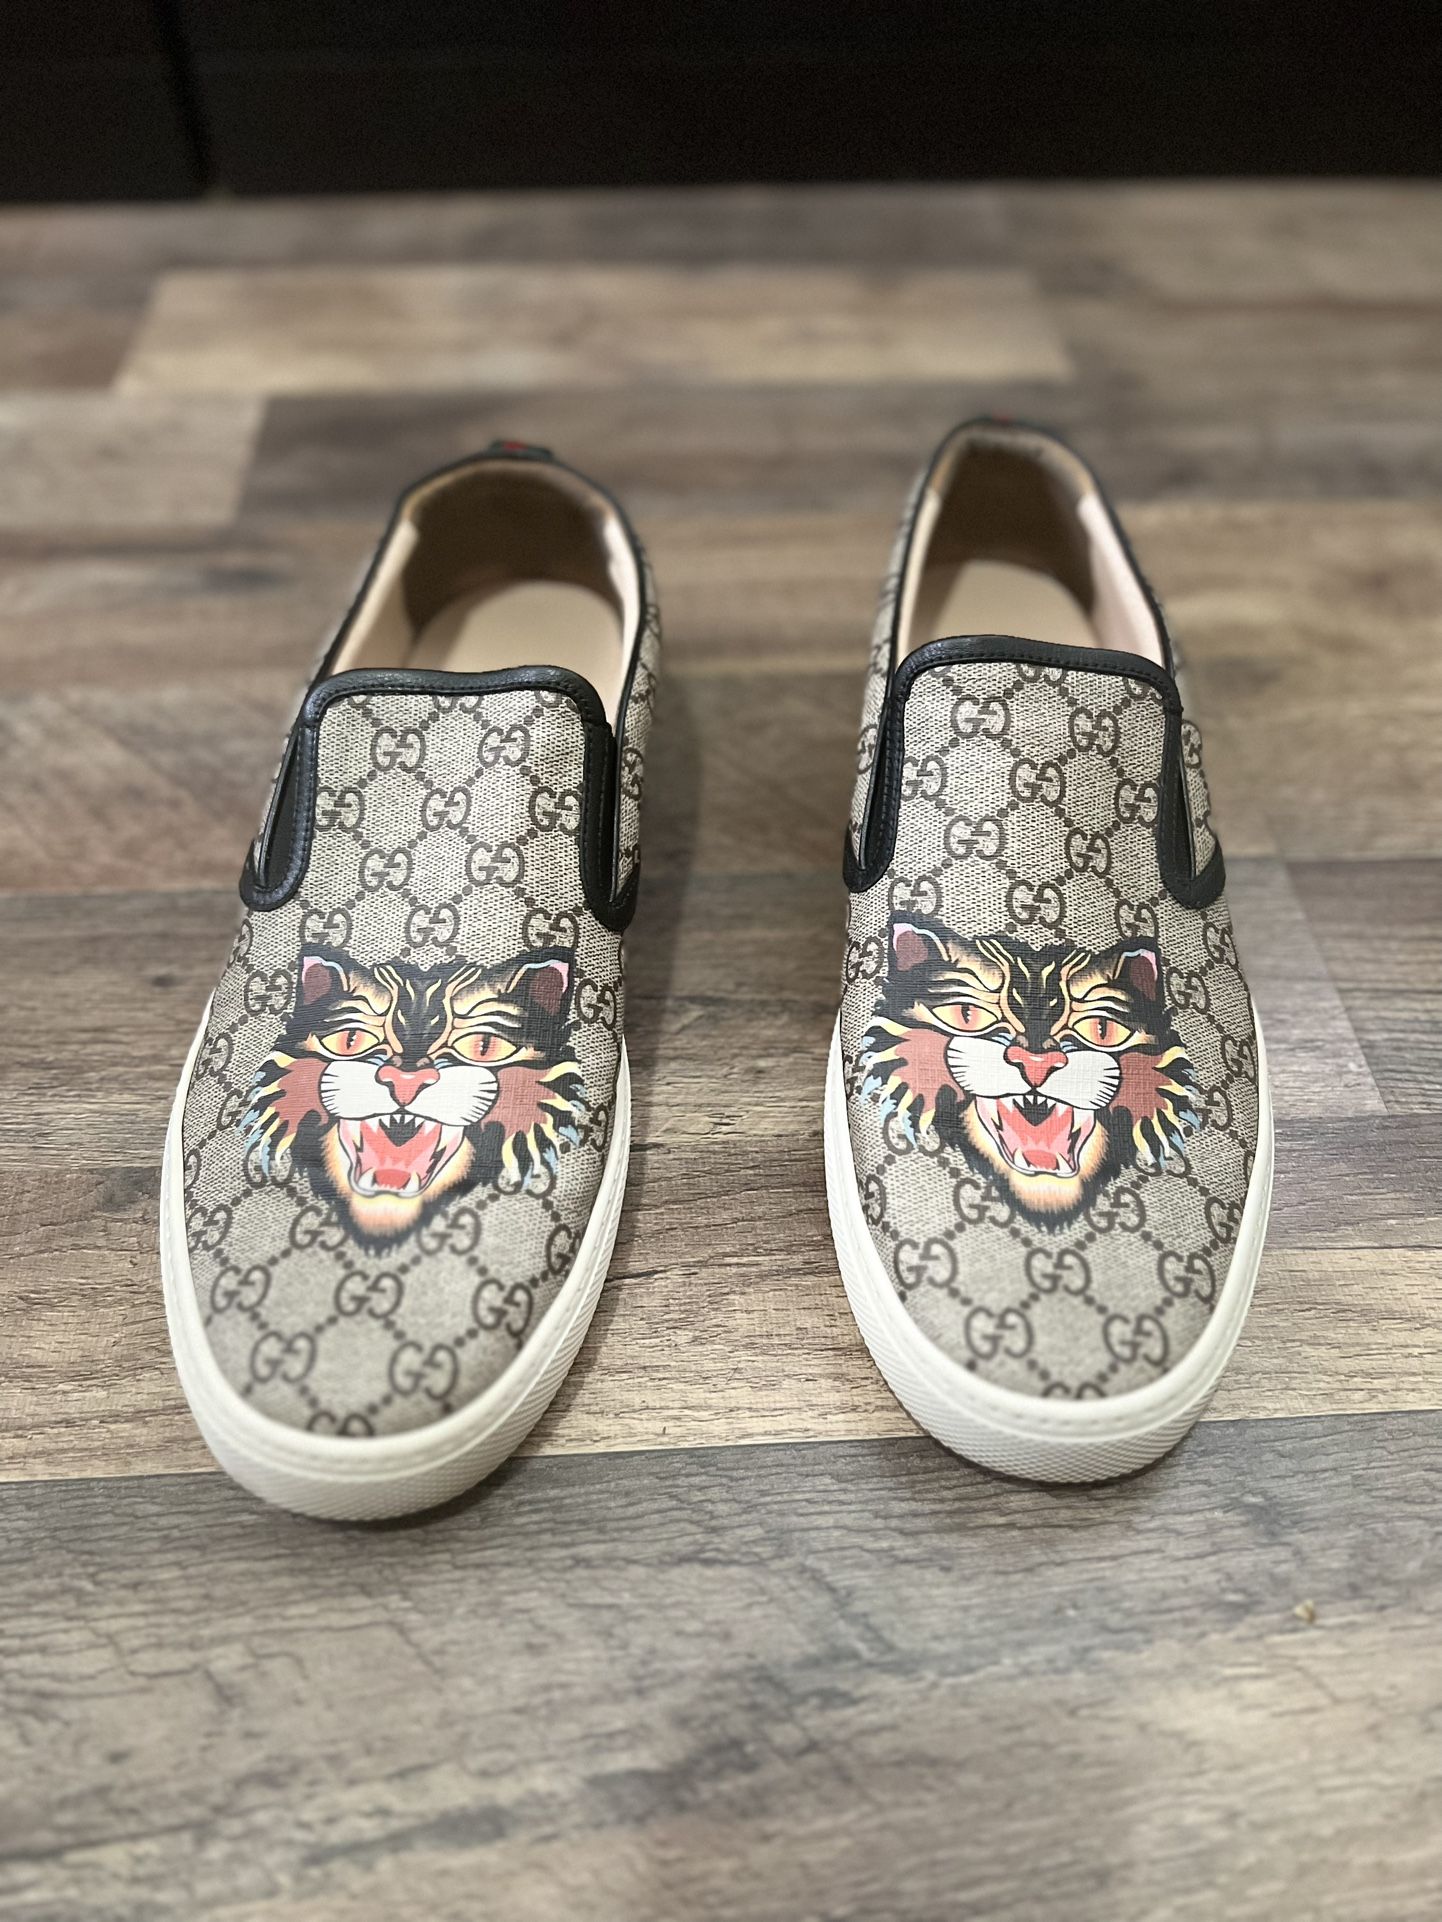 GG Supreme Angry Cat Dublin Slip-On Sneakers for in Los - OfferUp